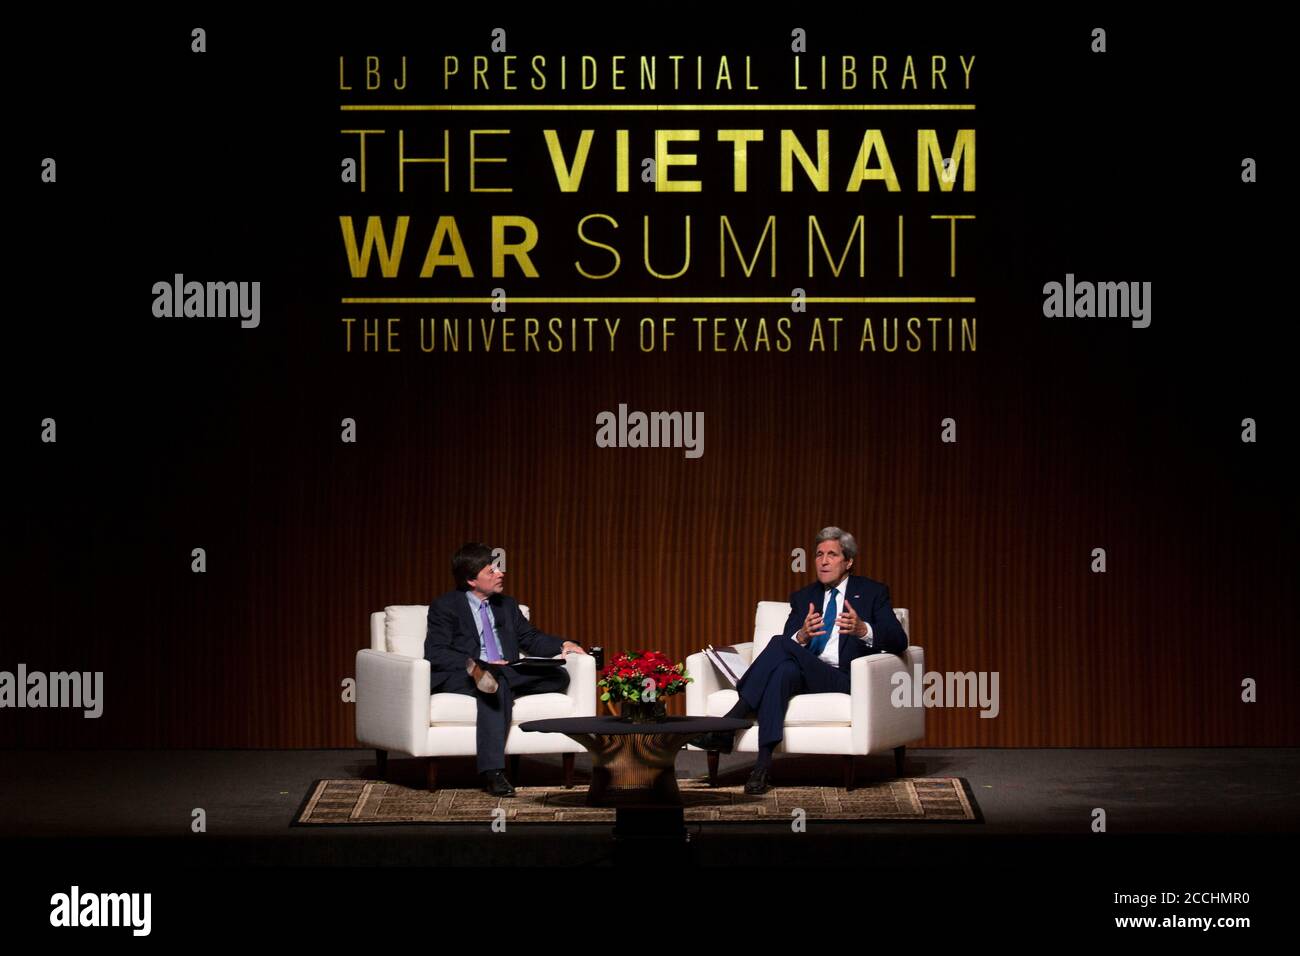 U.S. Secretary of State John Kerry, right, a Vietnam War veteran, speaks with documentary filmmaker Ken Burns during a conversation about the Vietnam War at the LBJ Presidential Library April 27, 2016 in Austin, Texas. Stock Photo